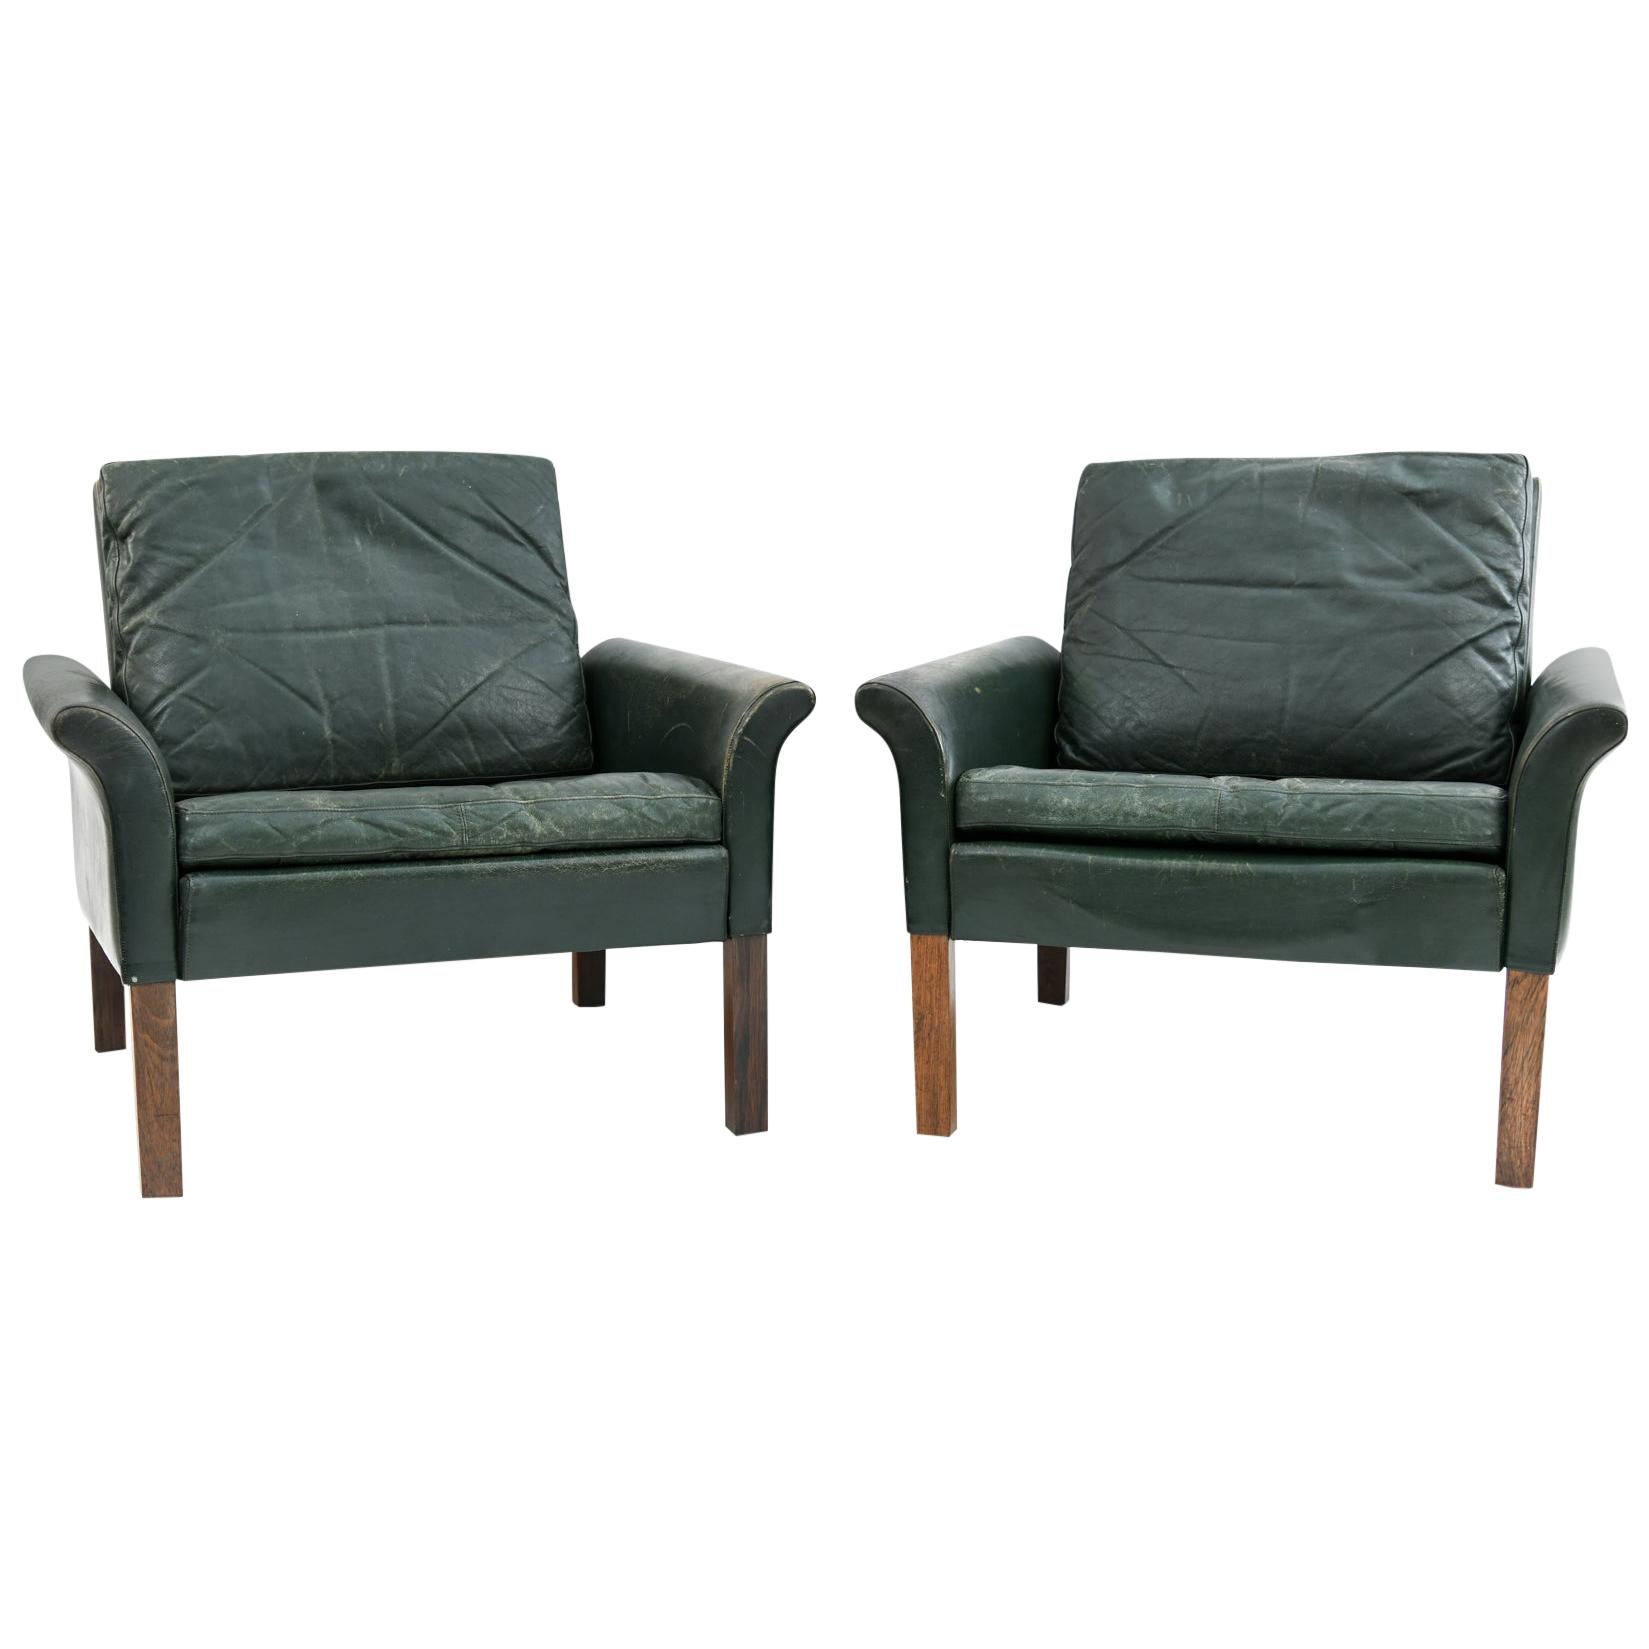 Pair of Hans Olsen for CS Møbler Model 500 Leather Easy Chairs, circa 1950s